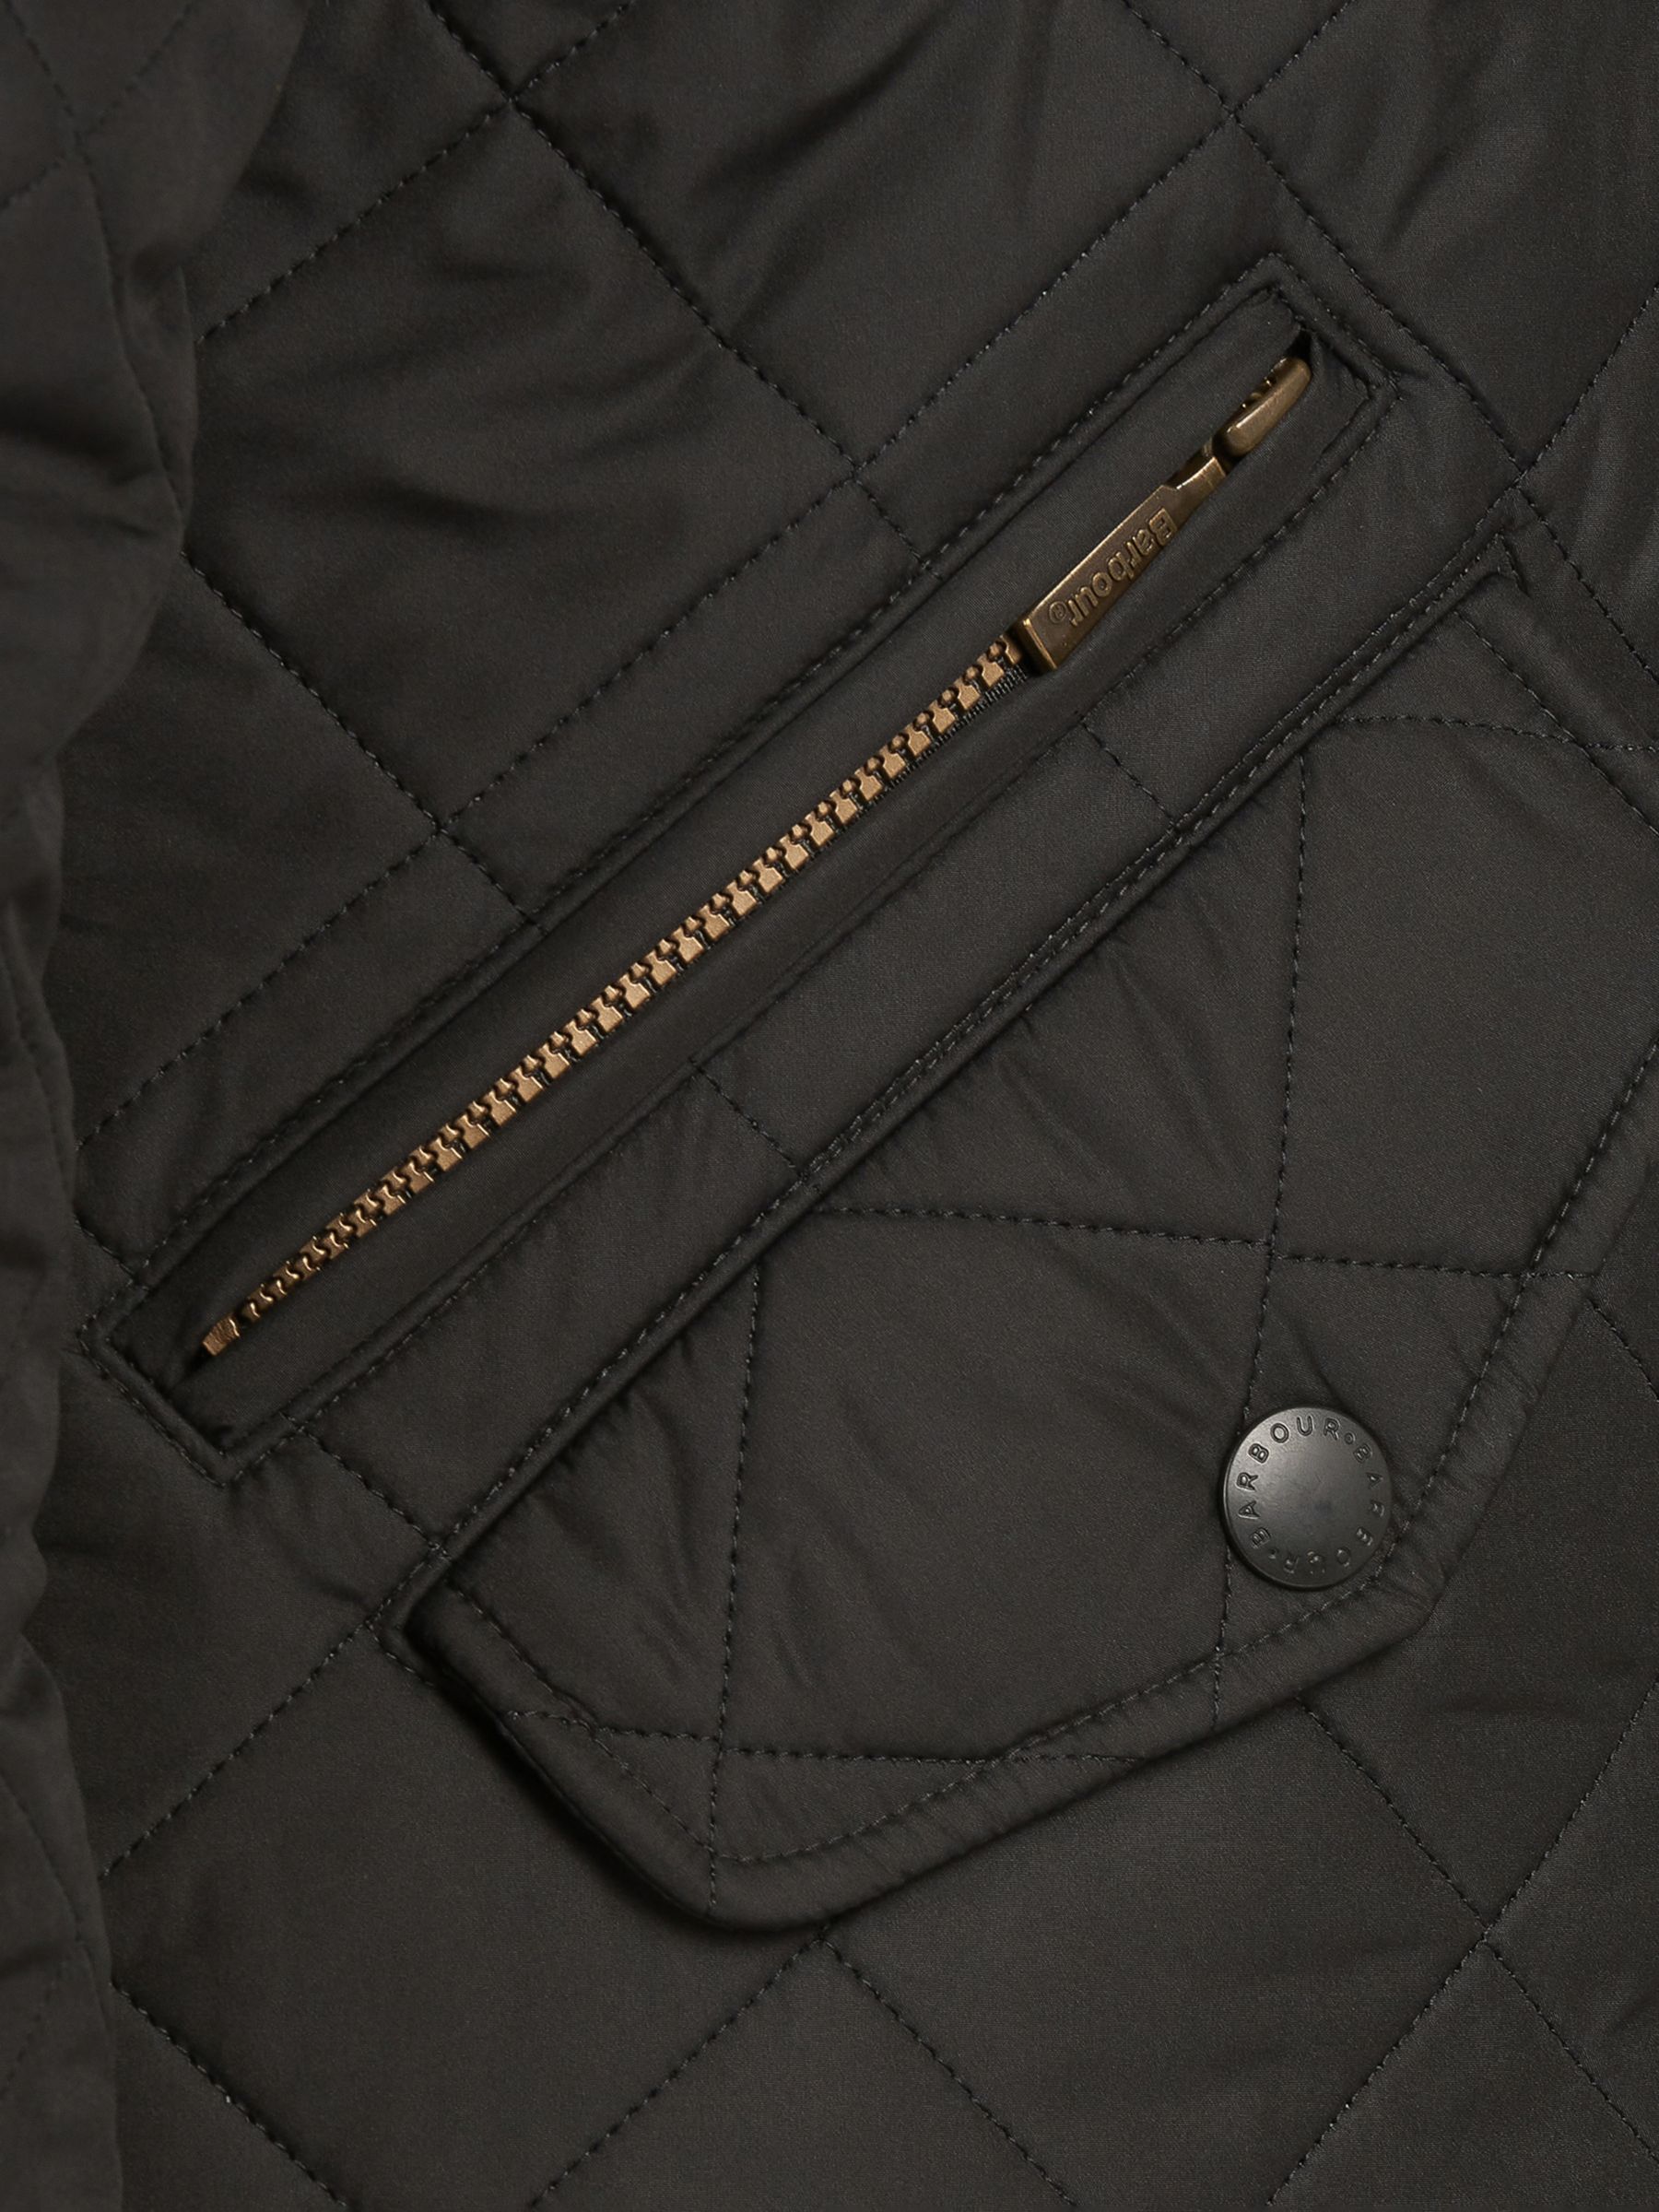 barbour lifestyle powell quilted jacket